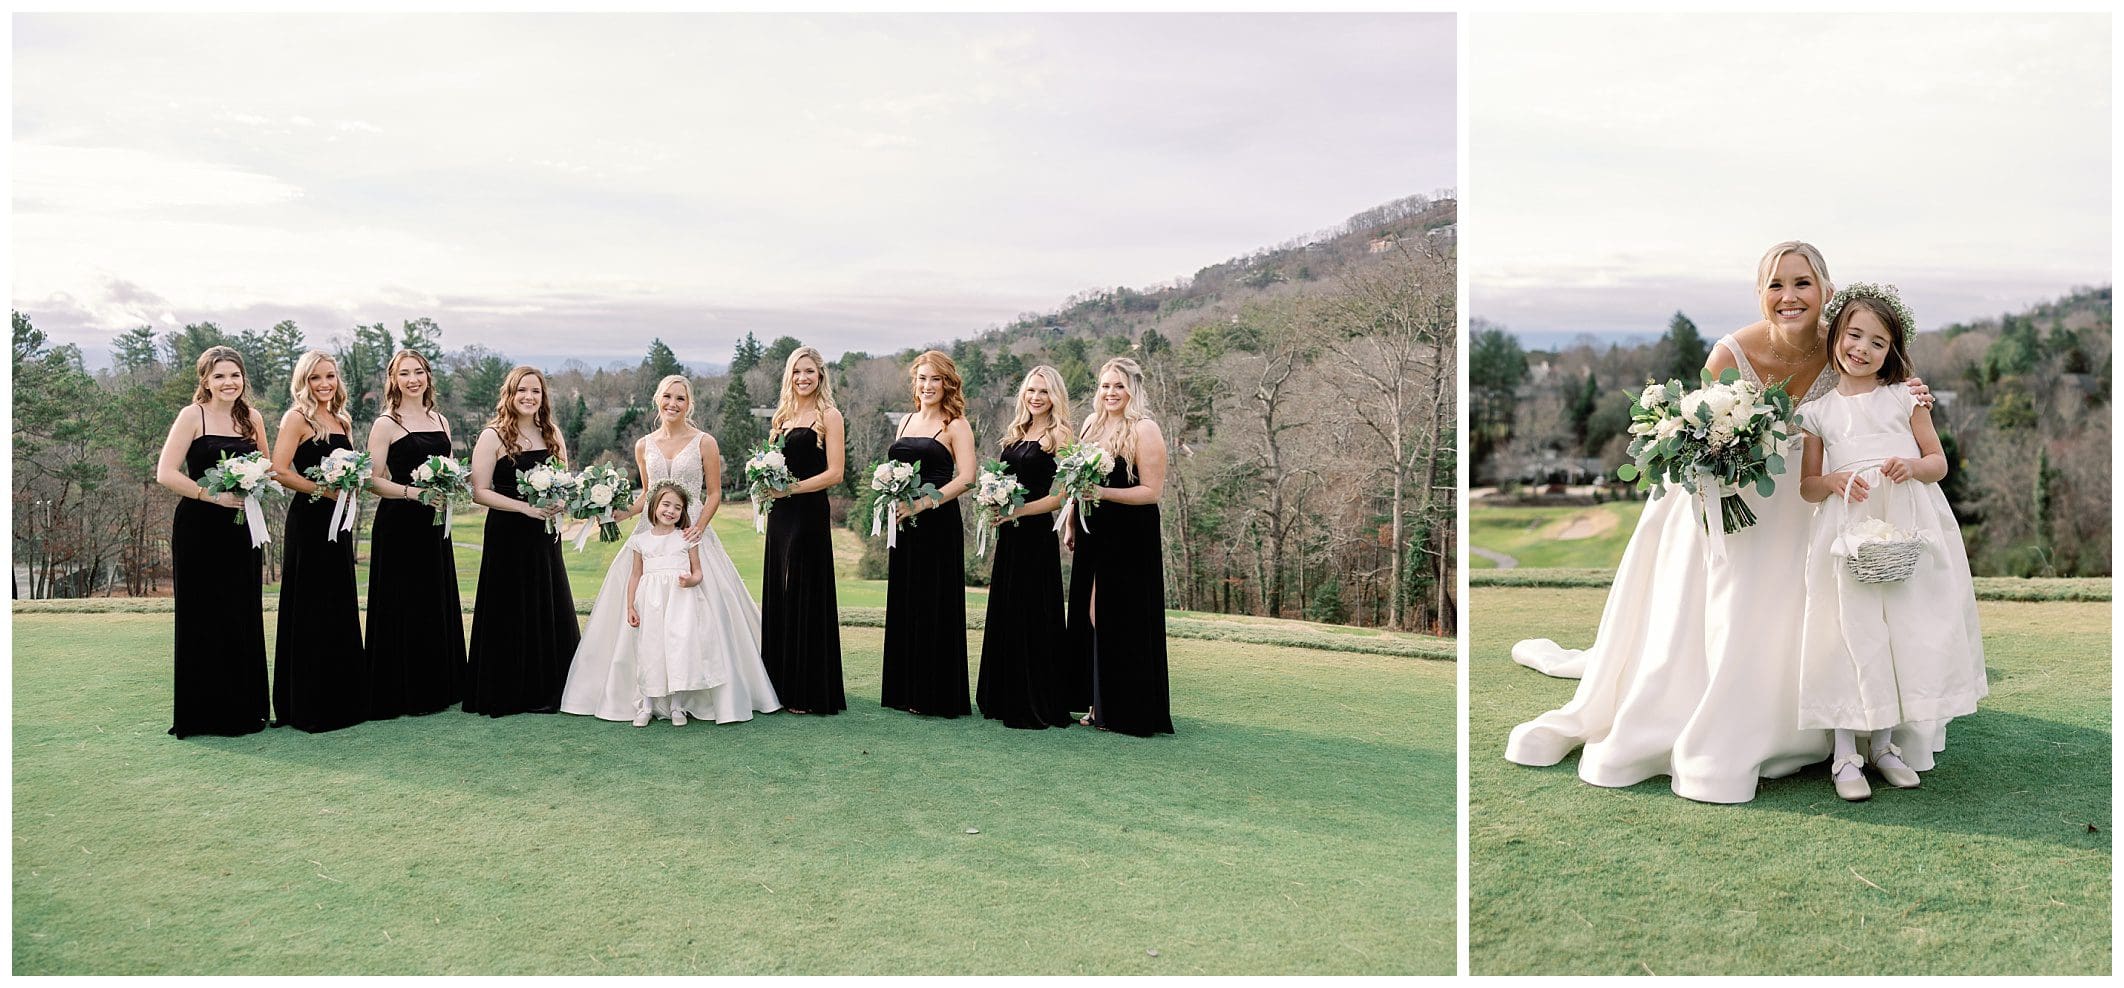 bride poses with bridesmaids wearing black dresses outdoors in Asheville